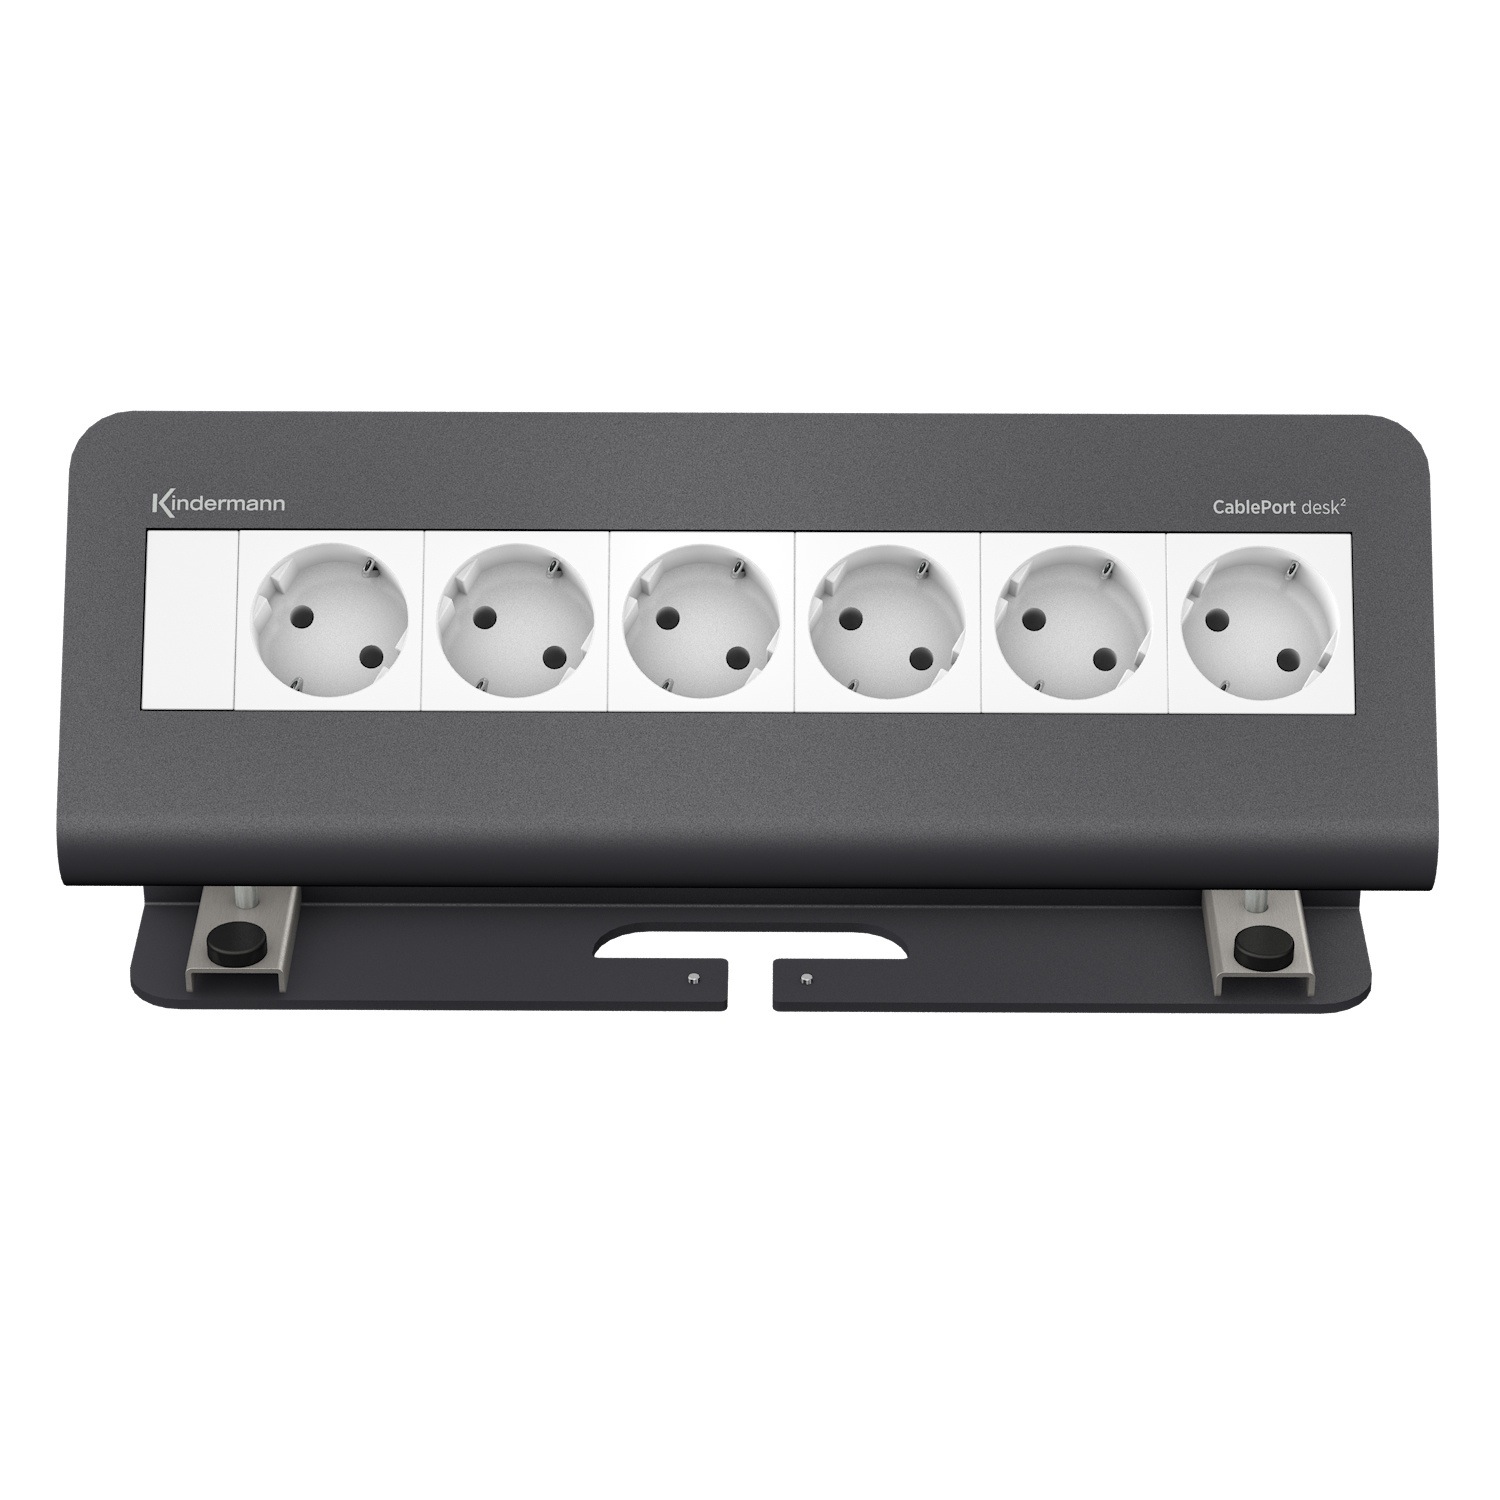 Cableport desk² 6-way 6 x power